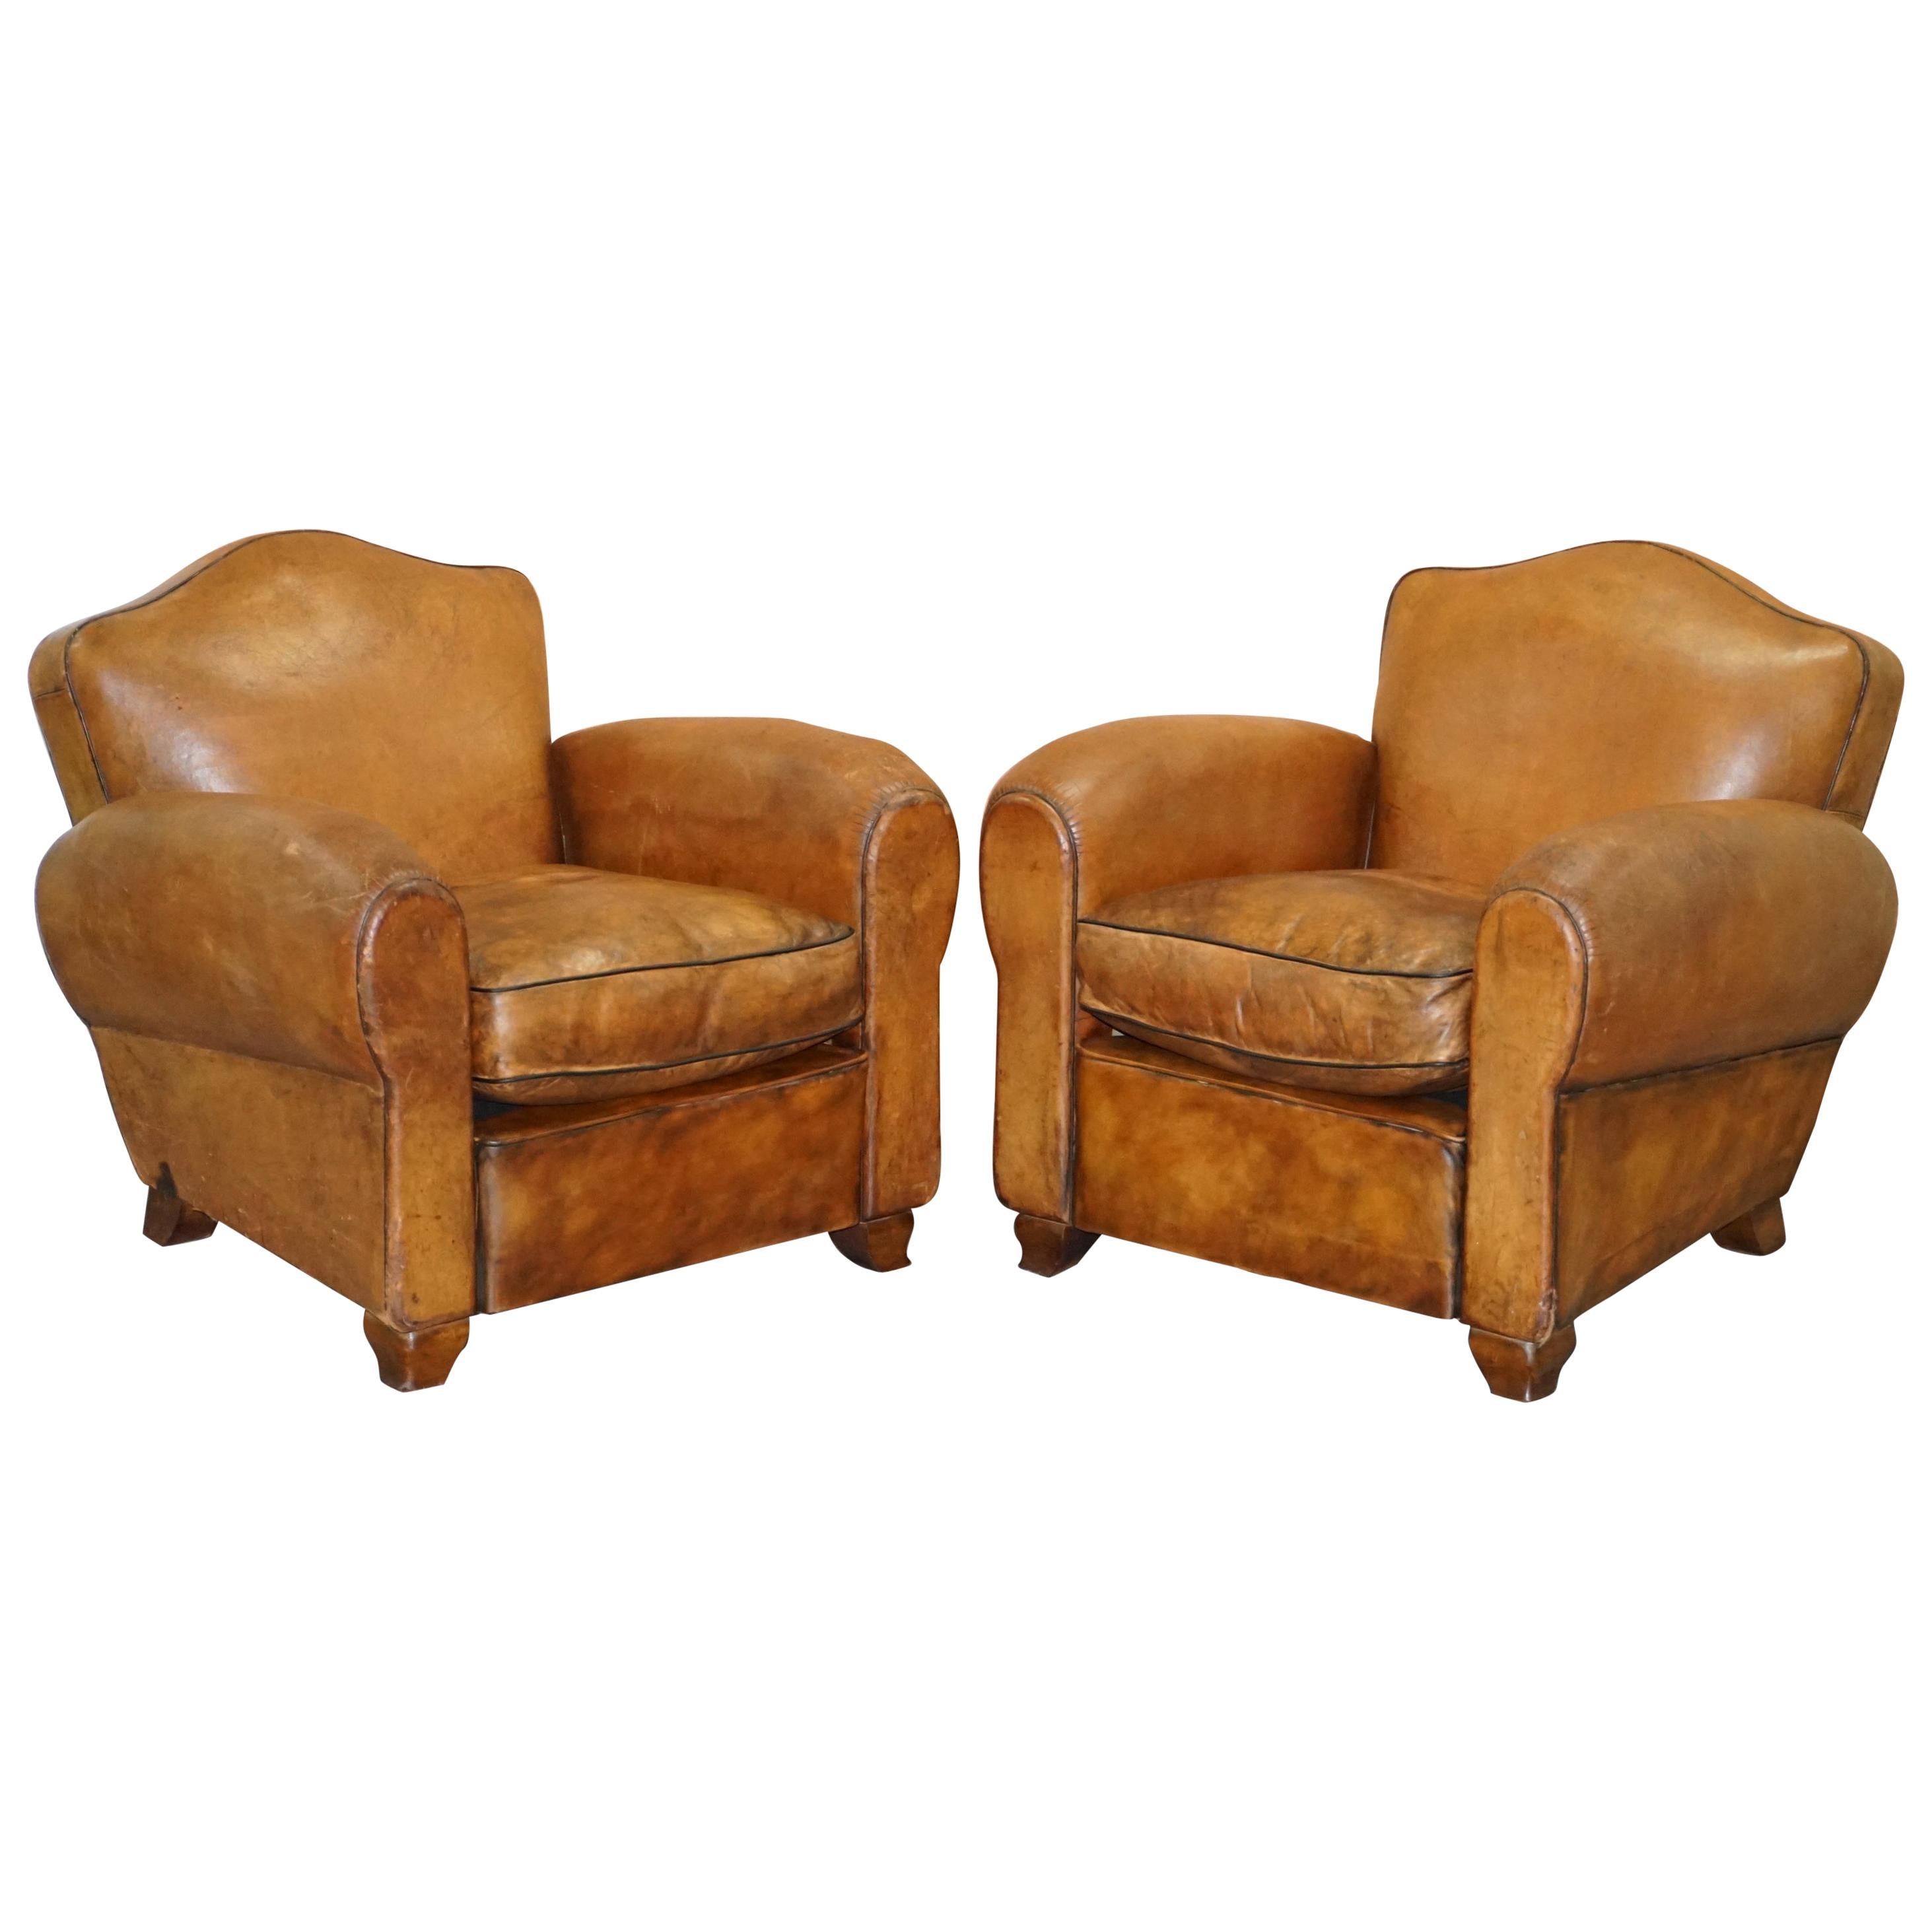 Rare Original Pair of French circa 1890 Brown Leather Club Armchairs Hand Dyed